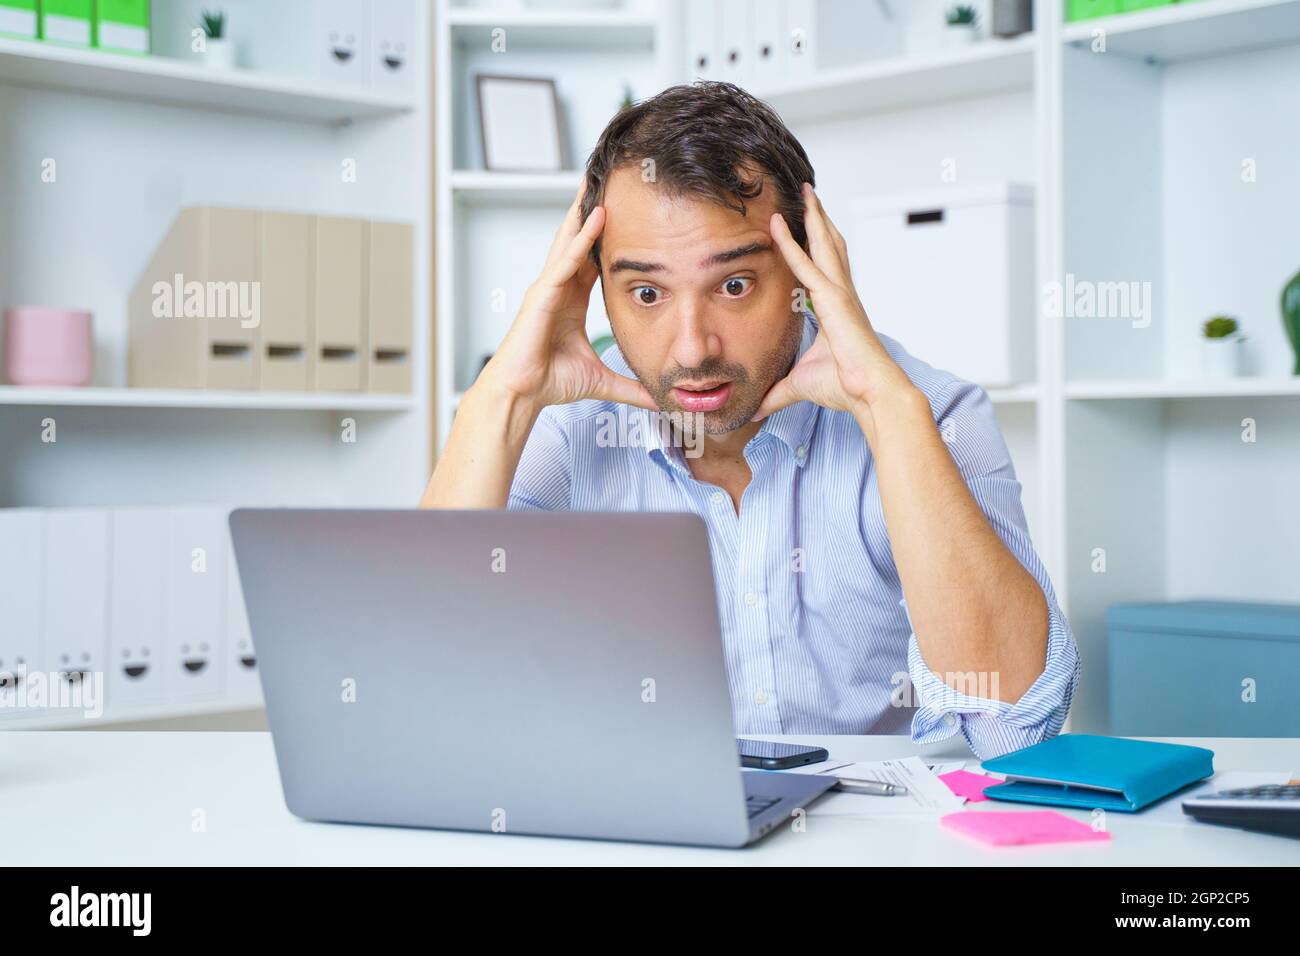 Frustrated man confused and surprised by an unexpected error working on computer Stock Photo